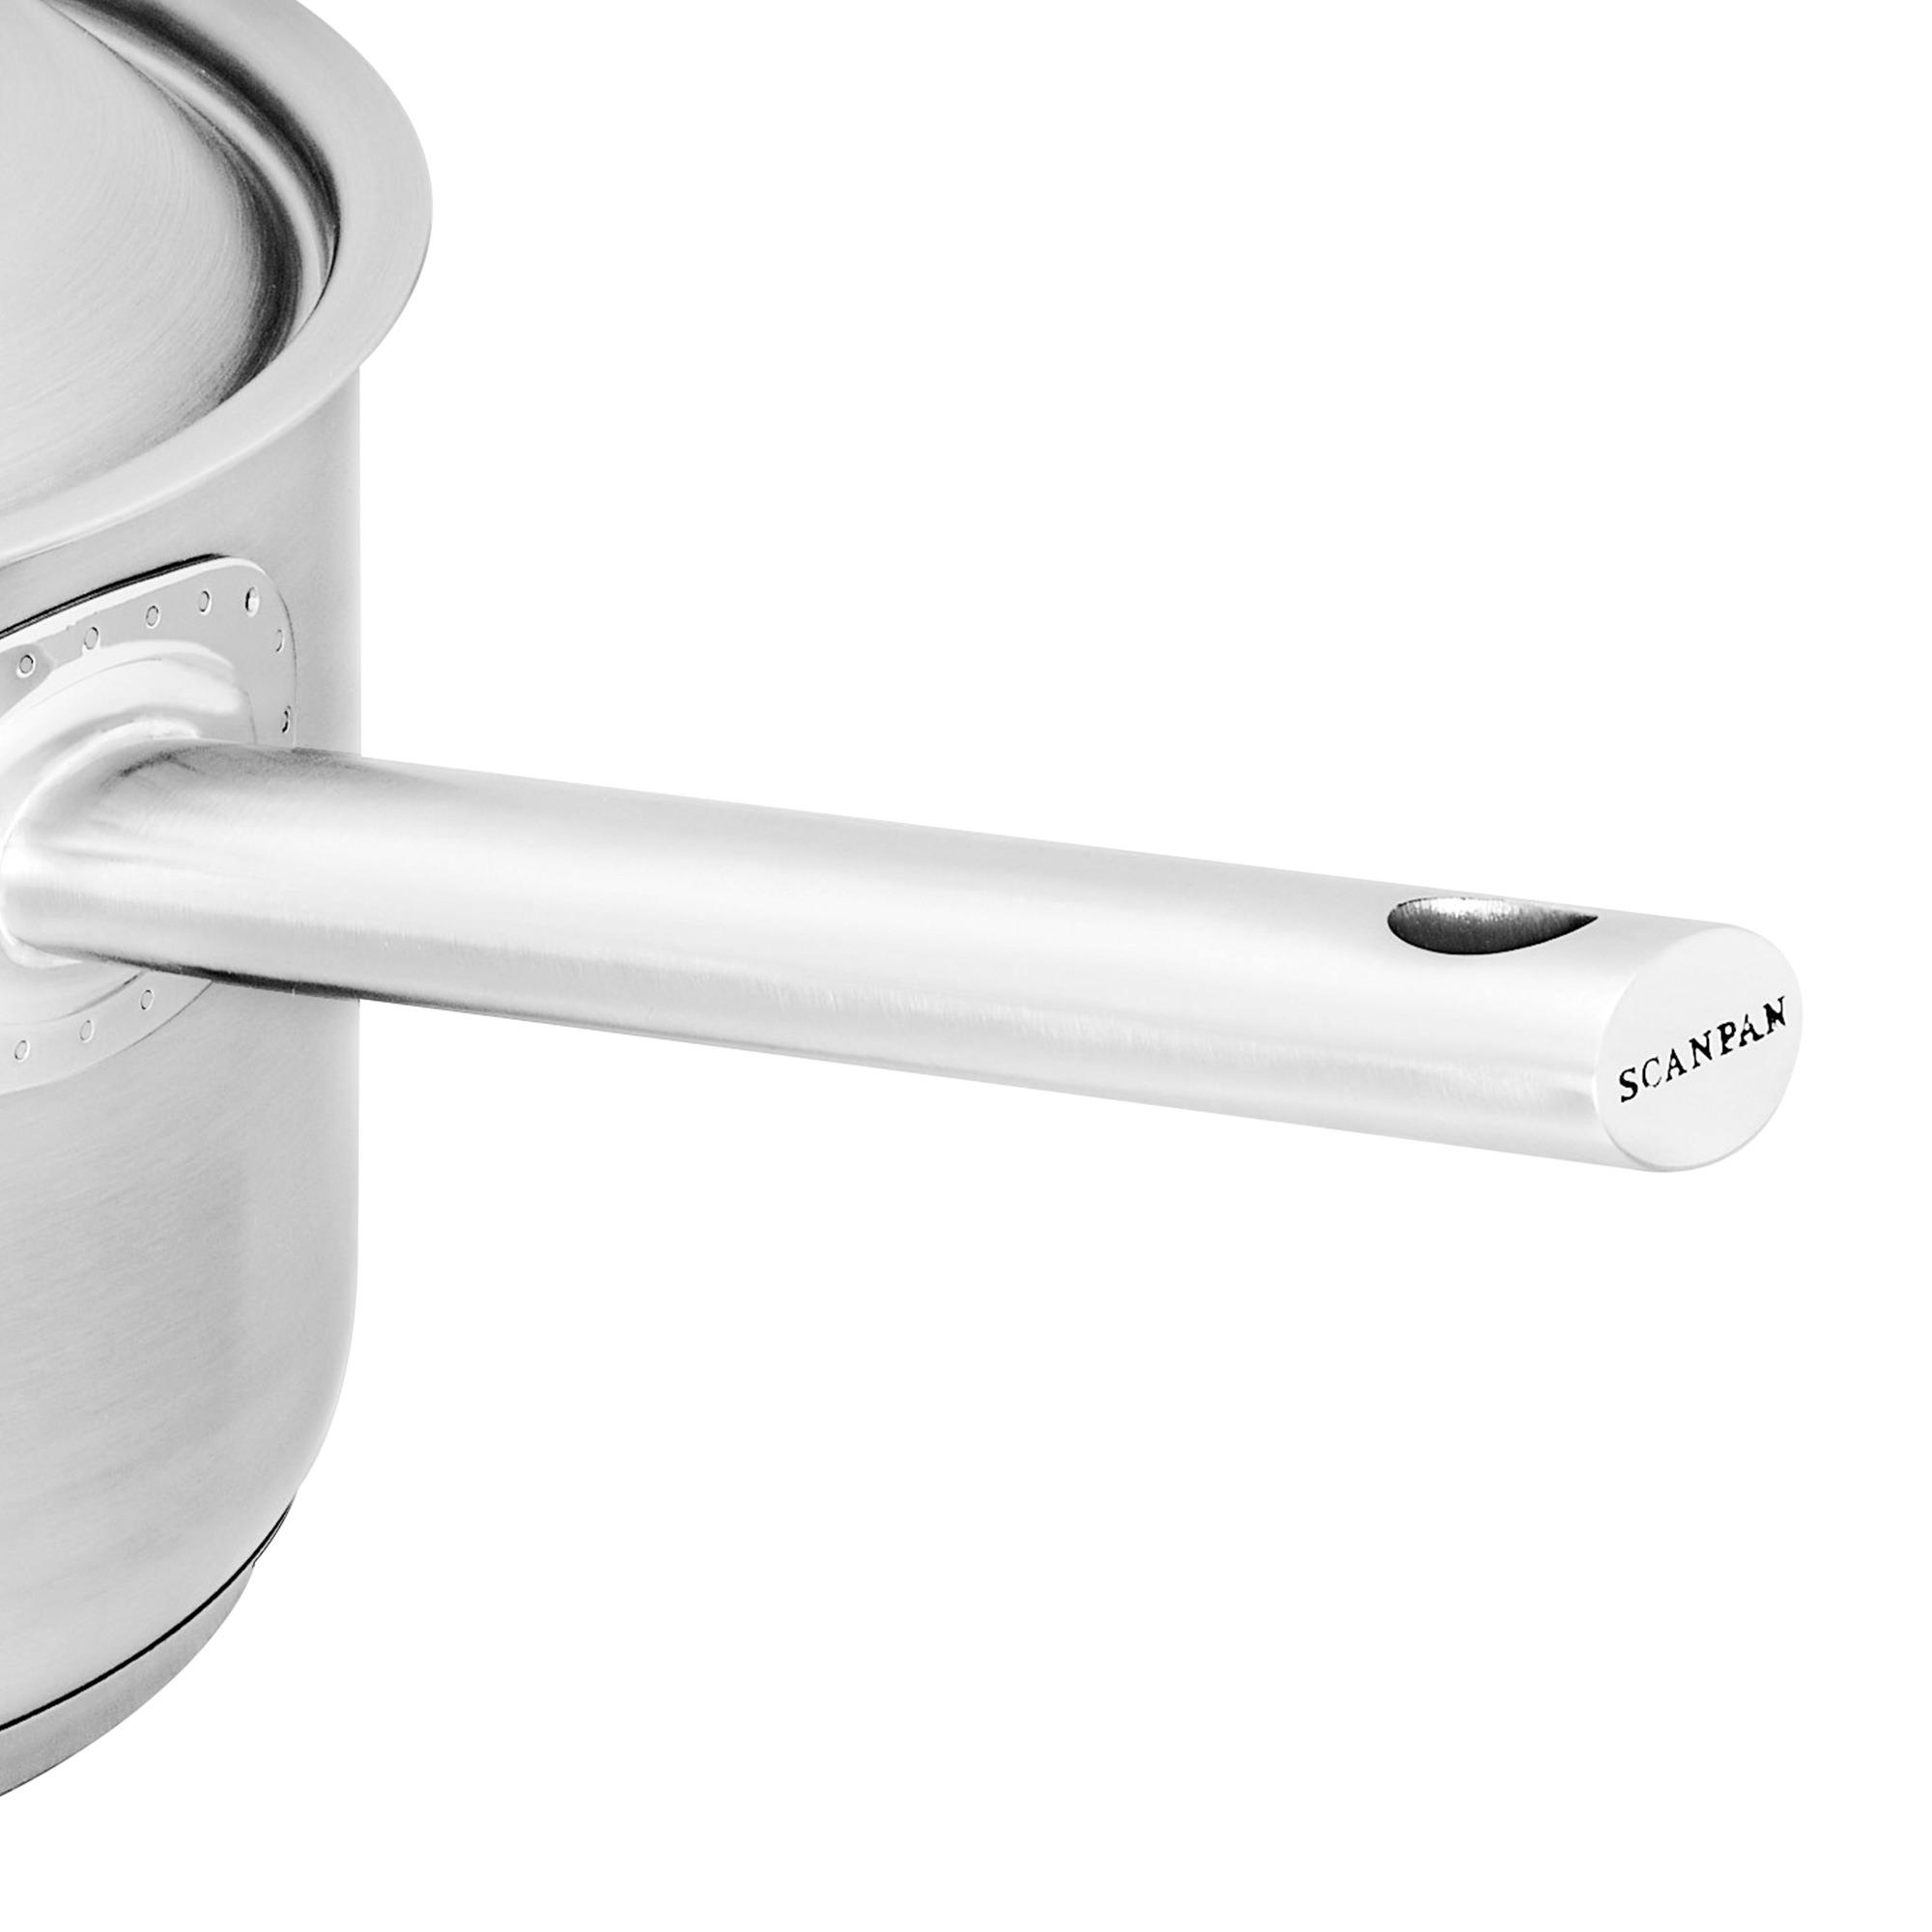 Scanpan Commercial Stainless Steel Covered Saucepan 20cm - 3.5L Image 4